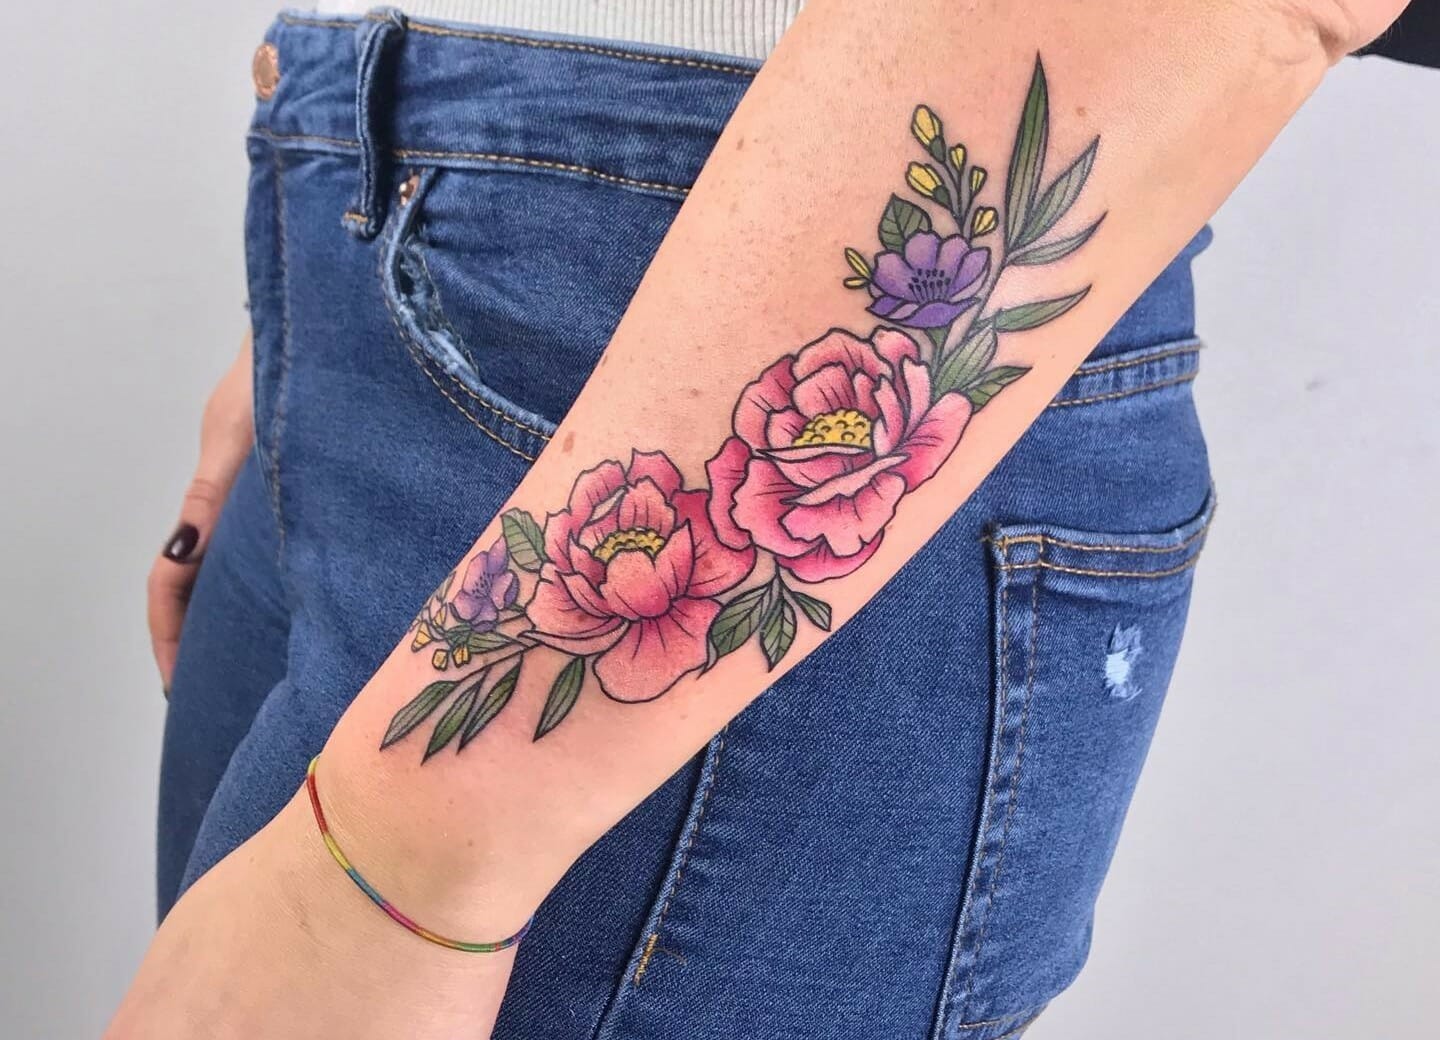 10+ Arm Flower Tattoo Ideas You'll Have To See To Believe! - alexie